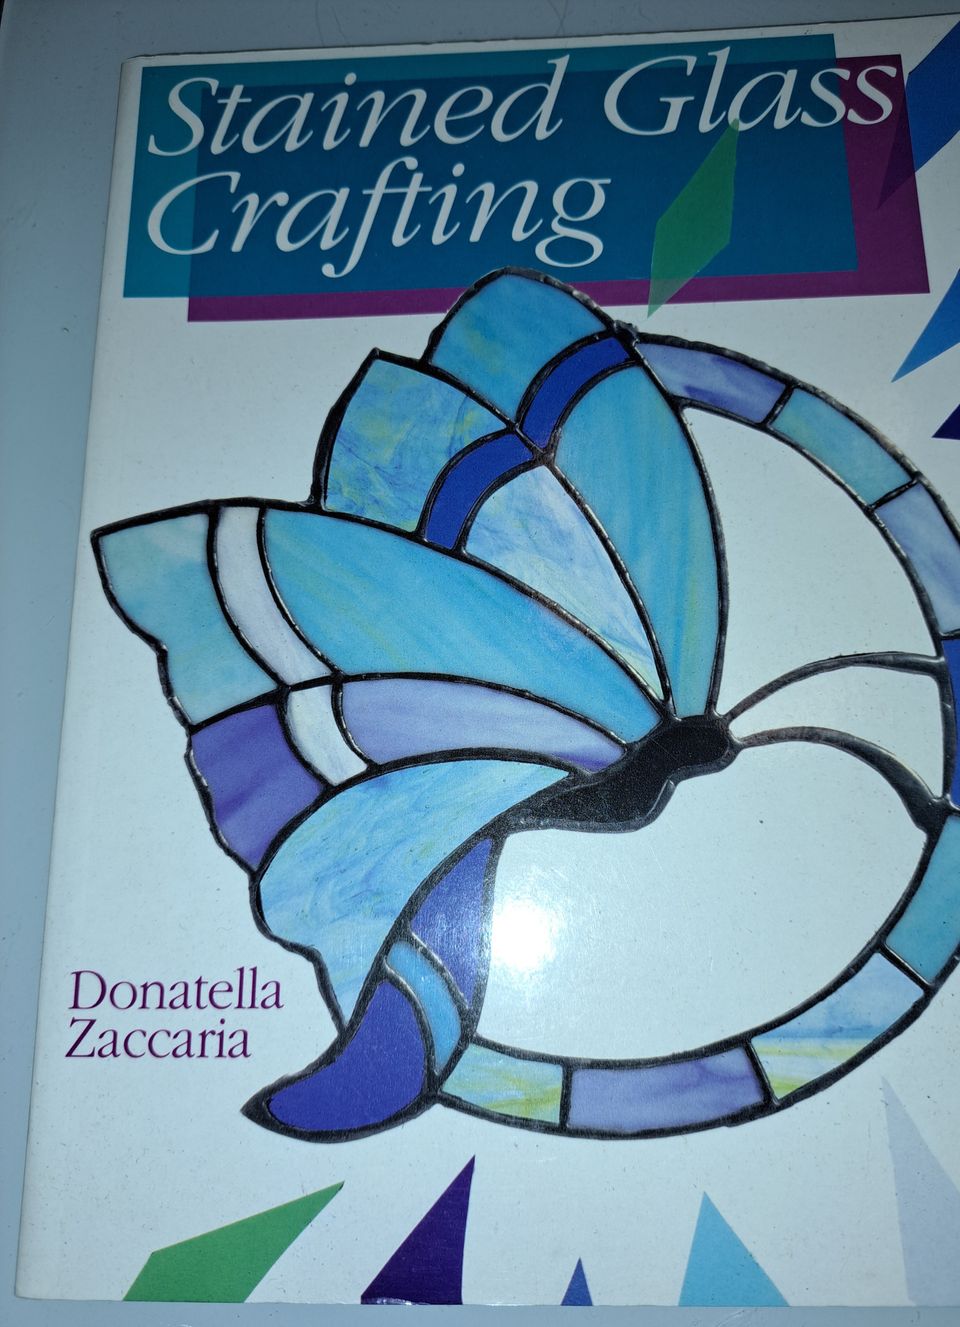 Donatella Zaccaria: stained glass crafting